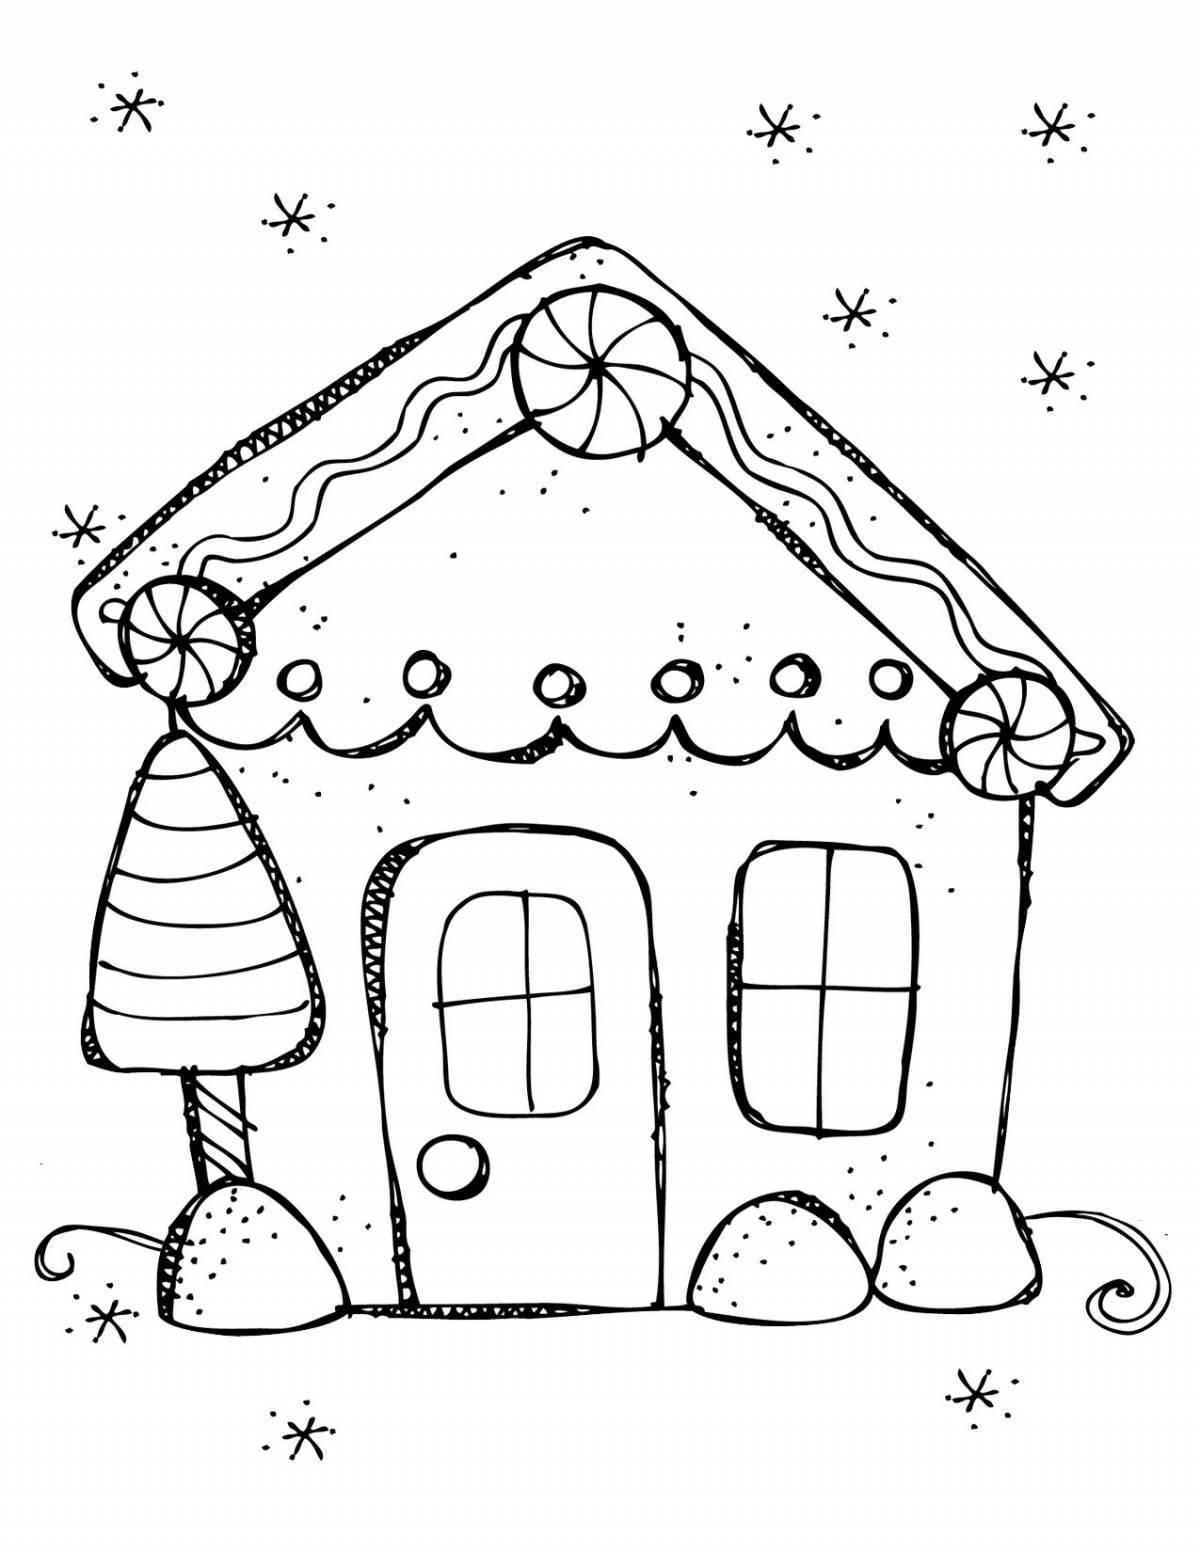 Adorable gingerbread house coloring book for kids